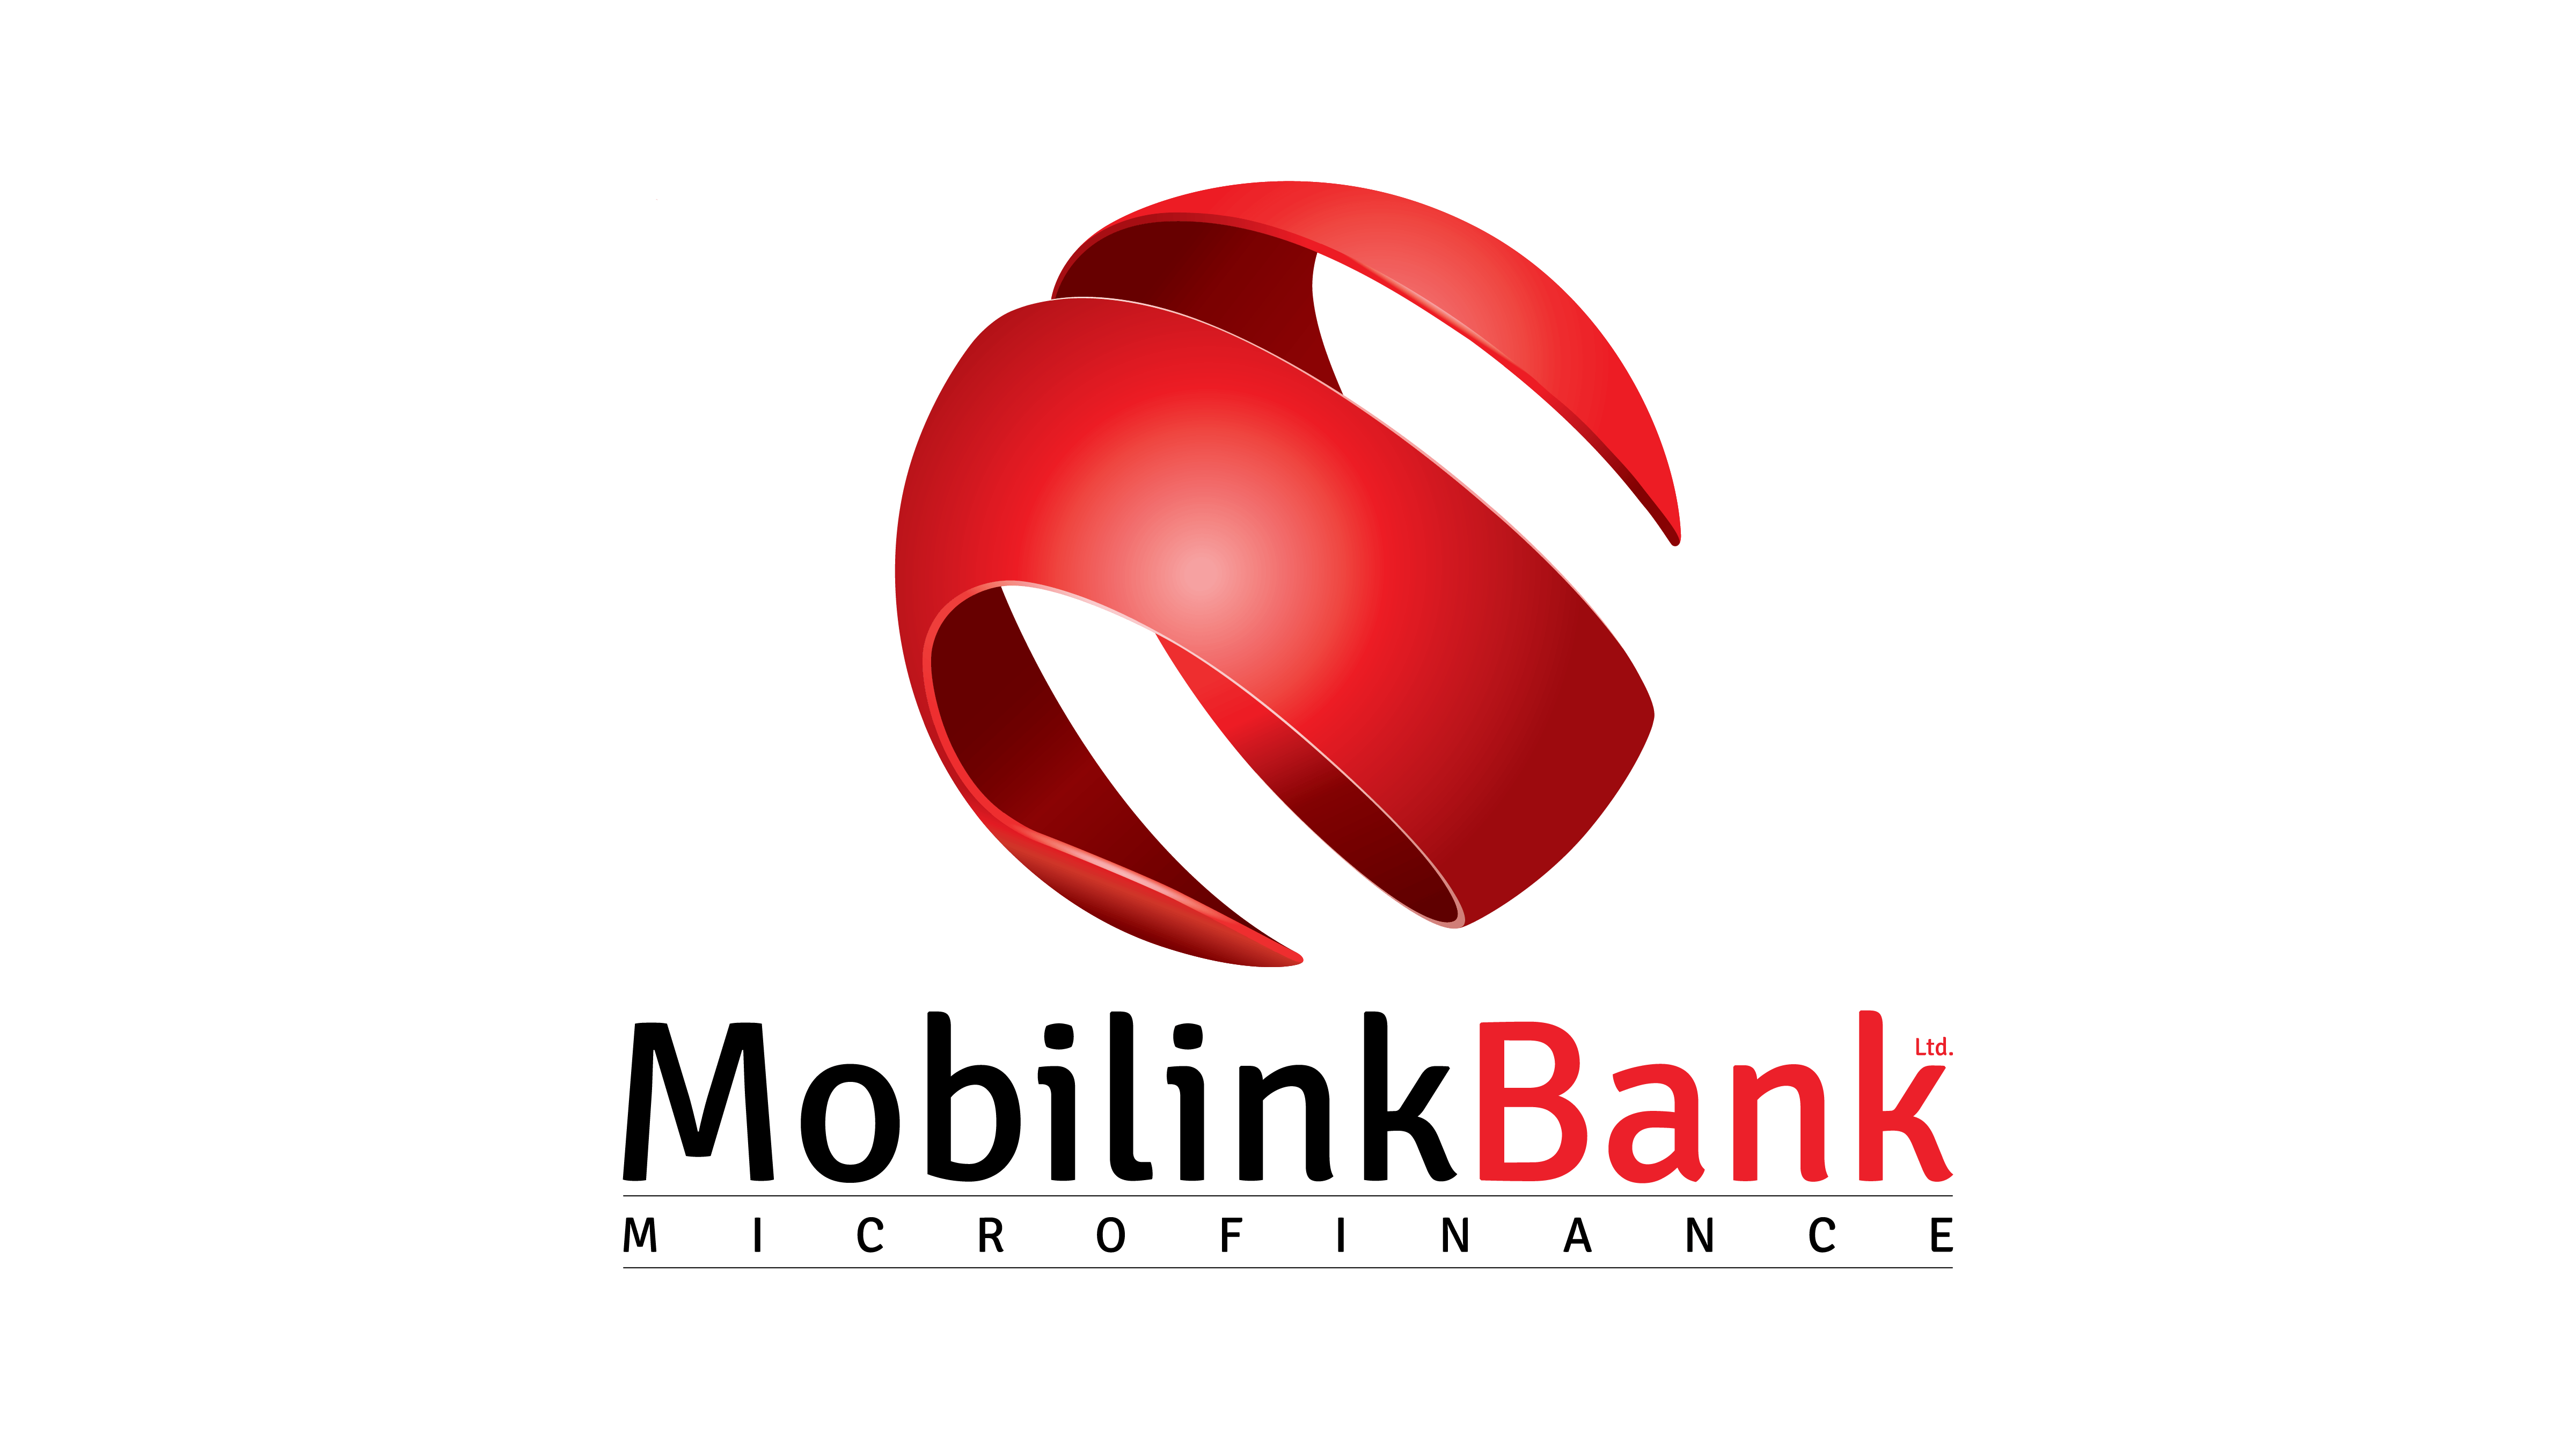 Mobilink Bank witnesses a 38% growth in lending to MSMEs